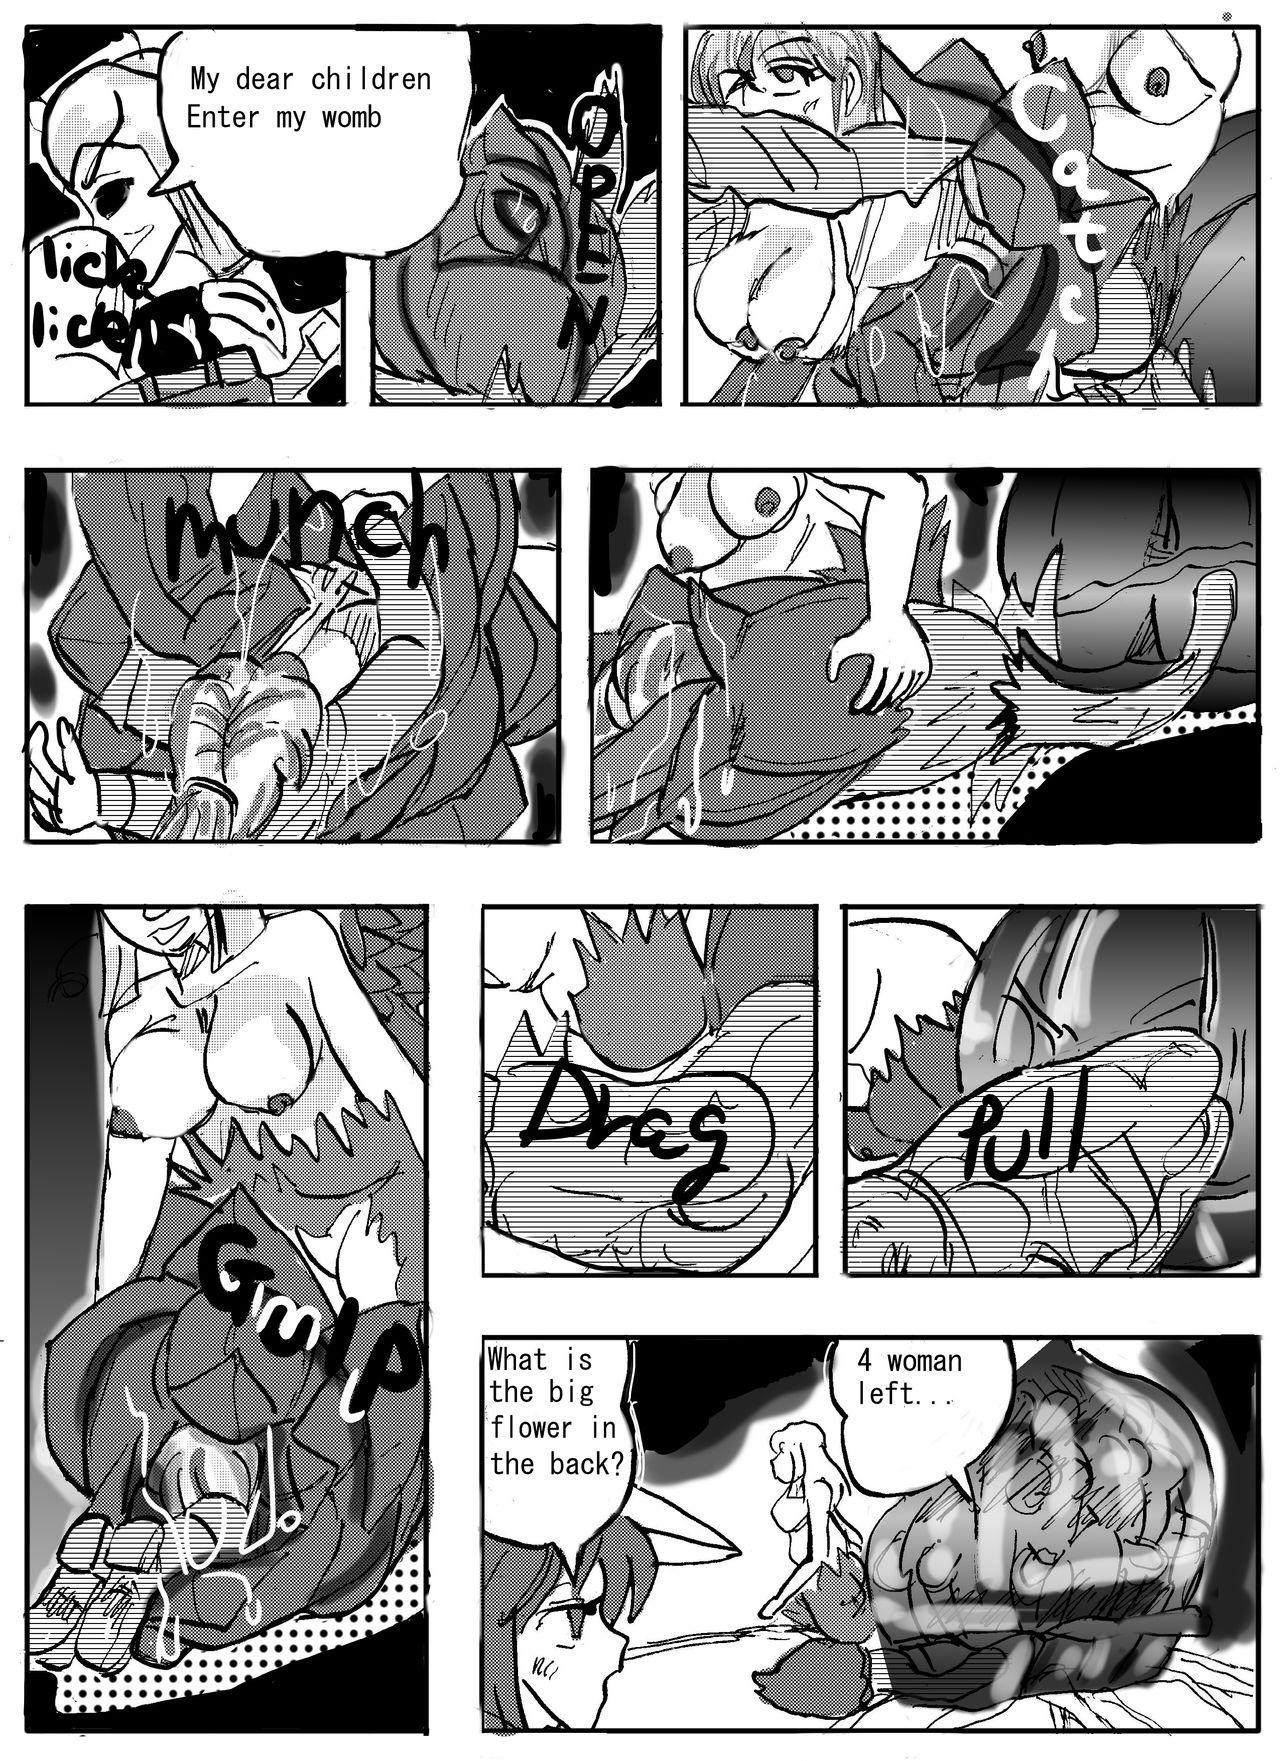 Babe Flower vore "Human and plant heterosexual ra*e and seed bed" - Original Three Some - Page 7